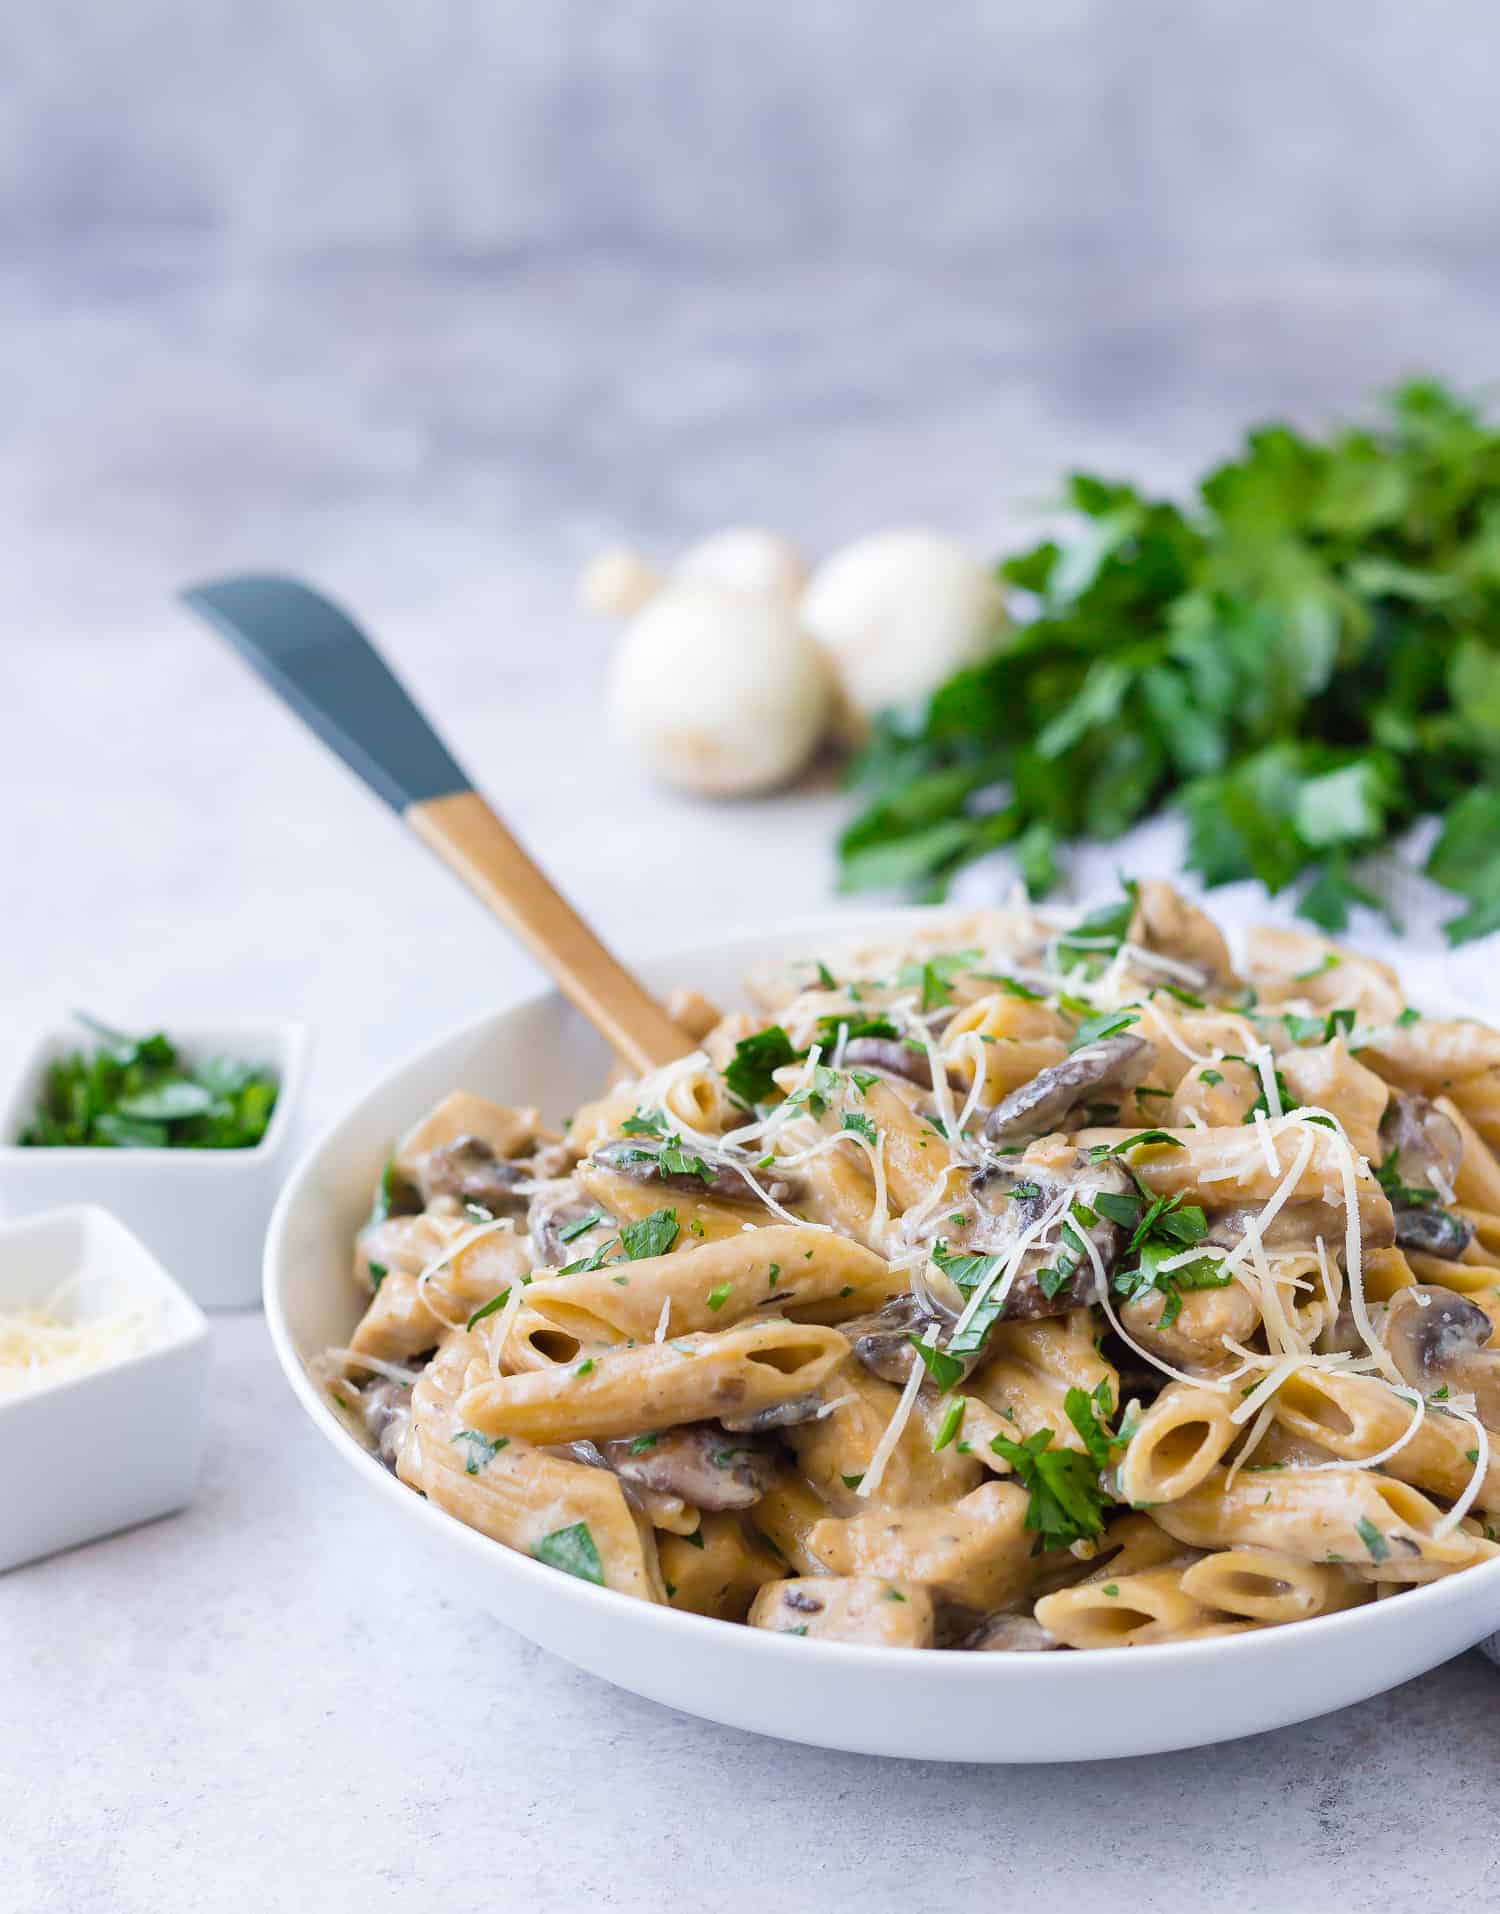 Pasta in serving bowl with mushrooms and parsley in background.